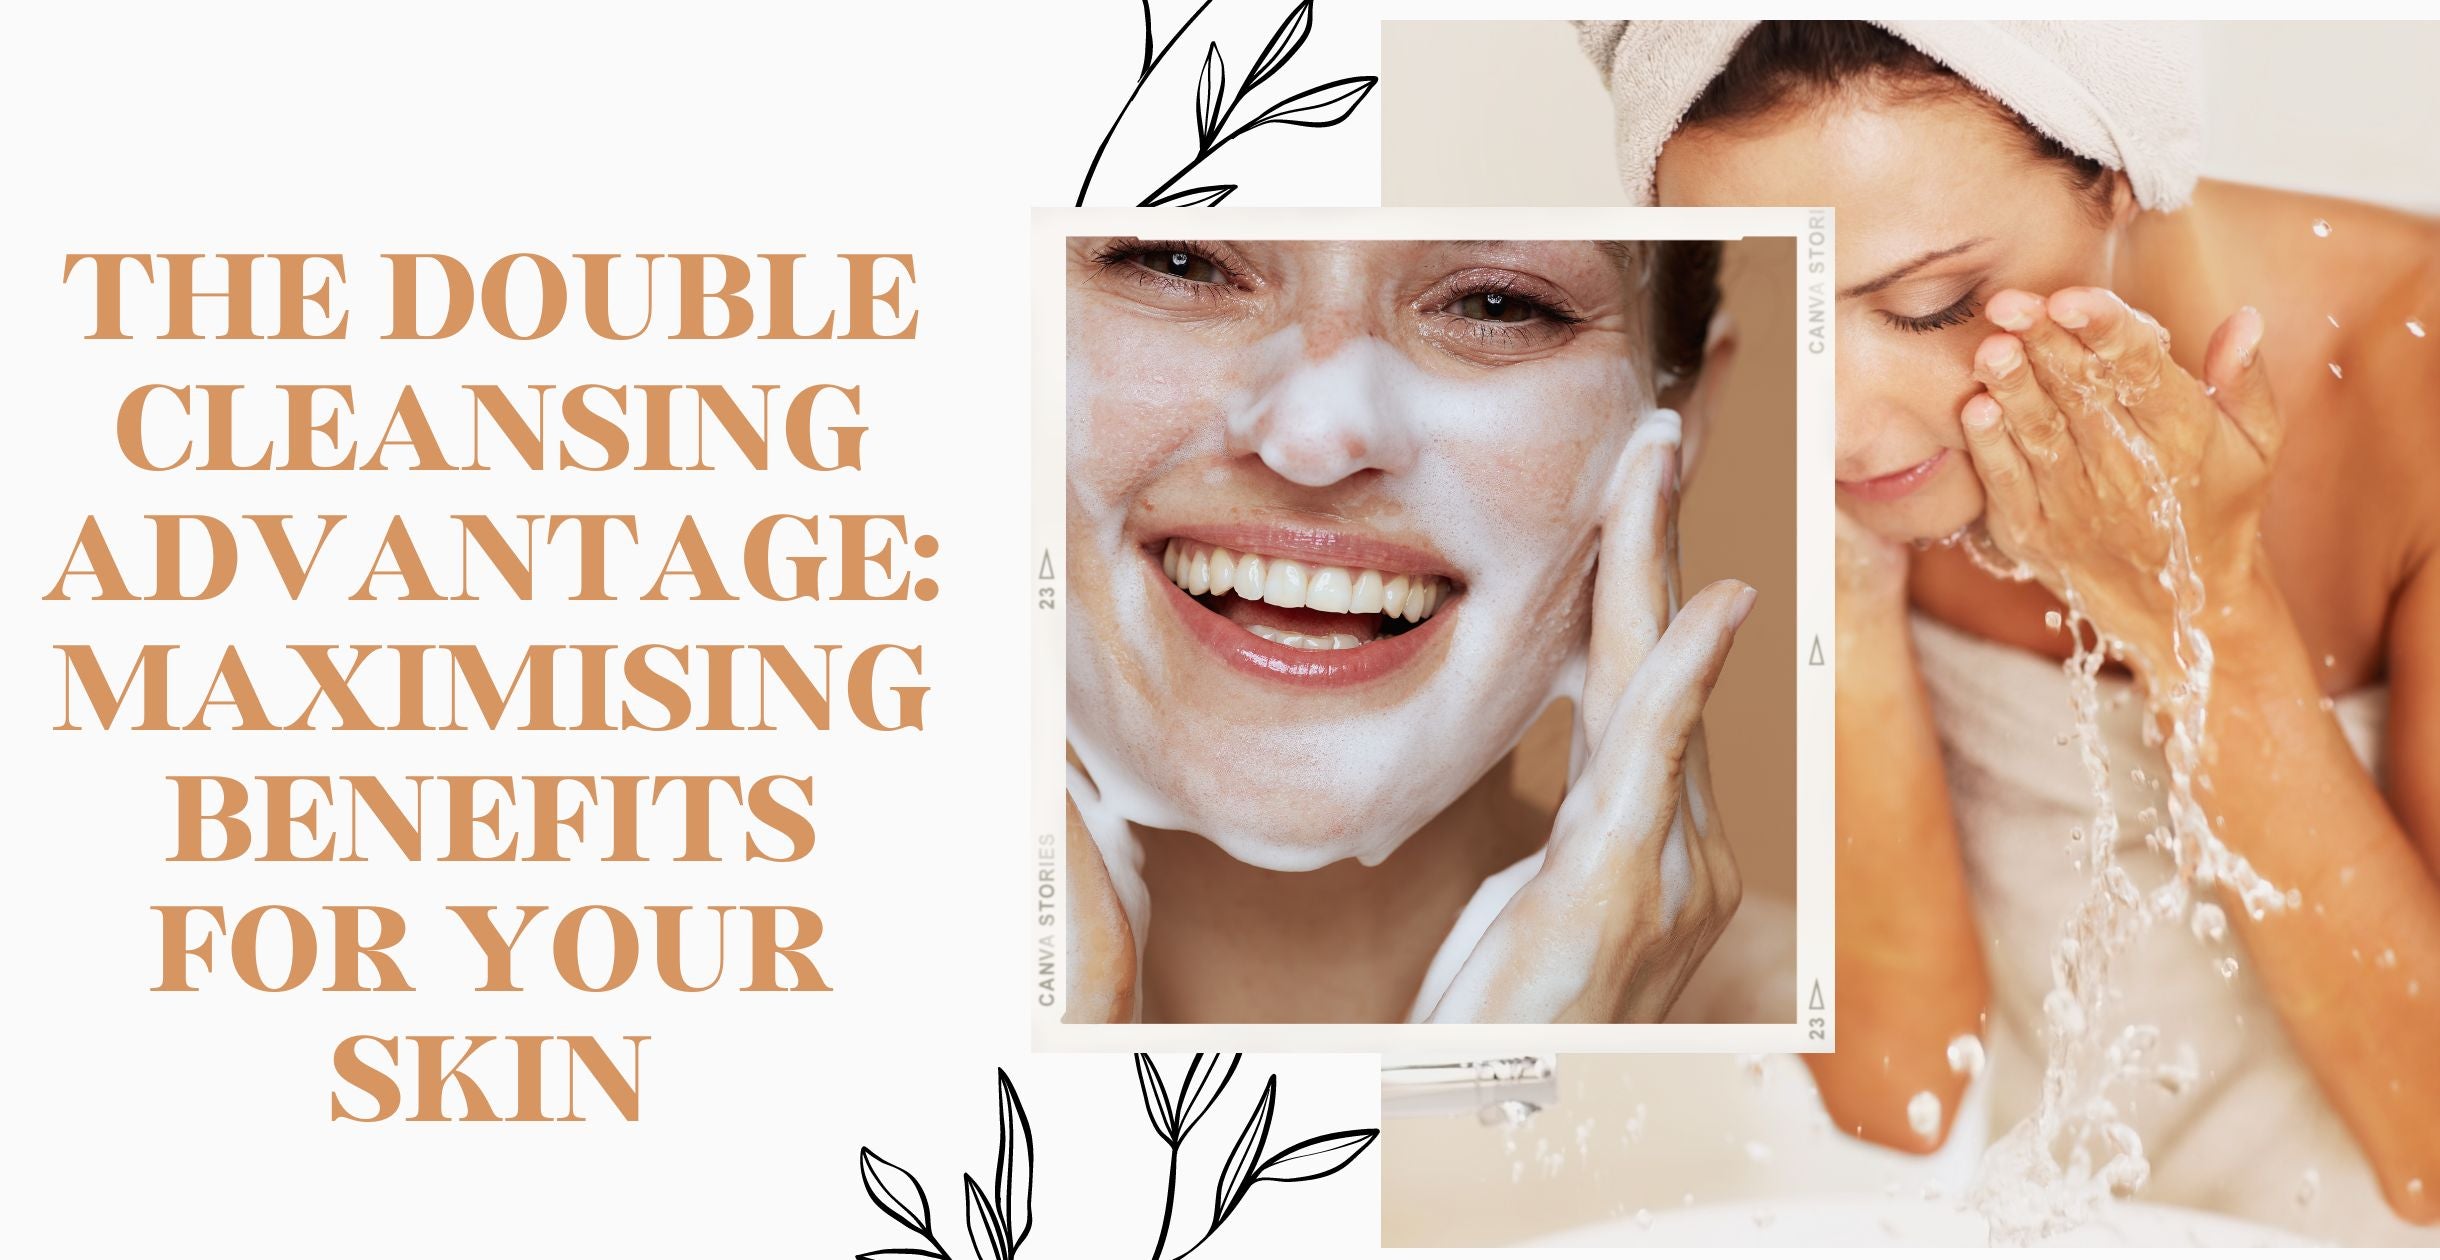 The Double Cleansing Advantage: Maximising Benefits for Your Skin